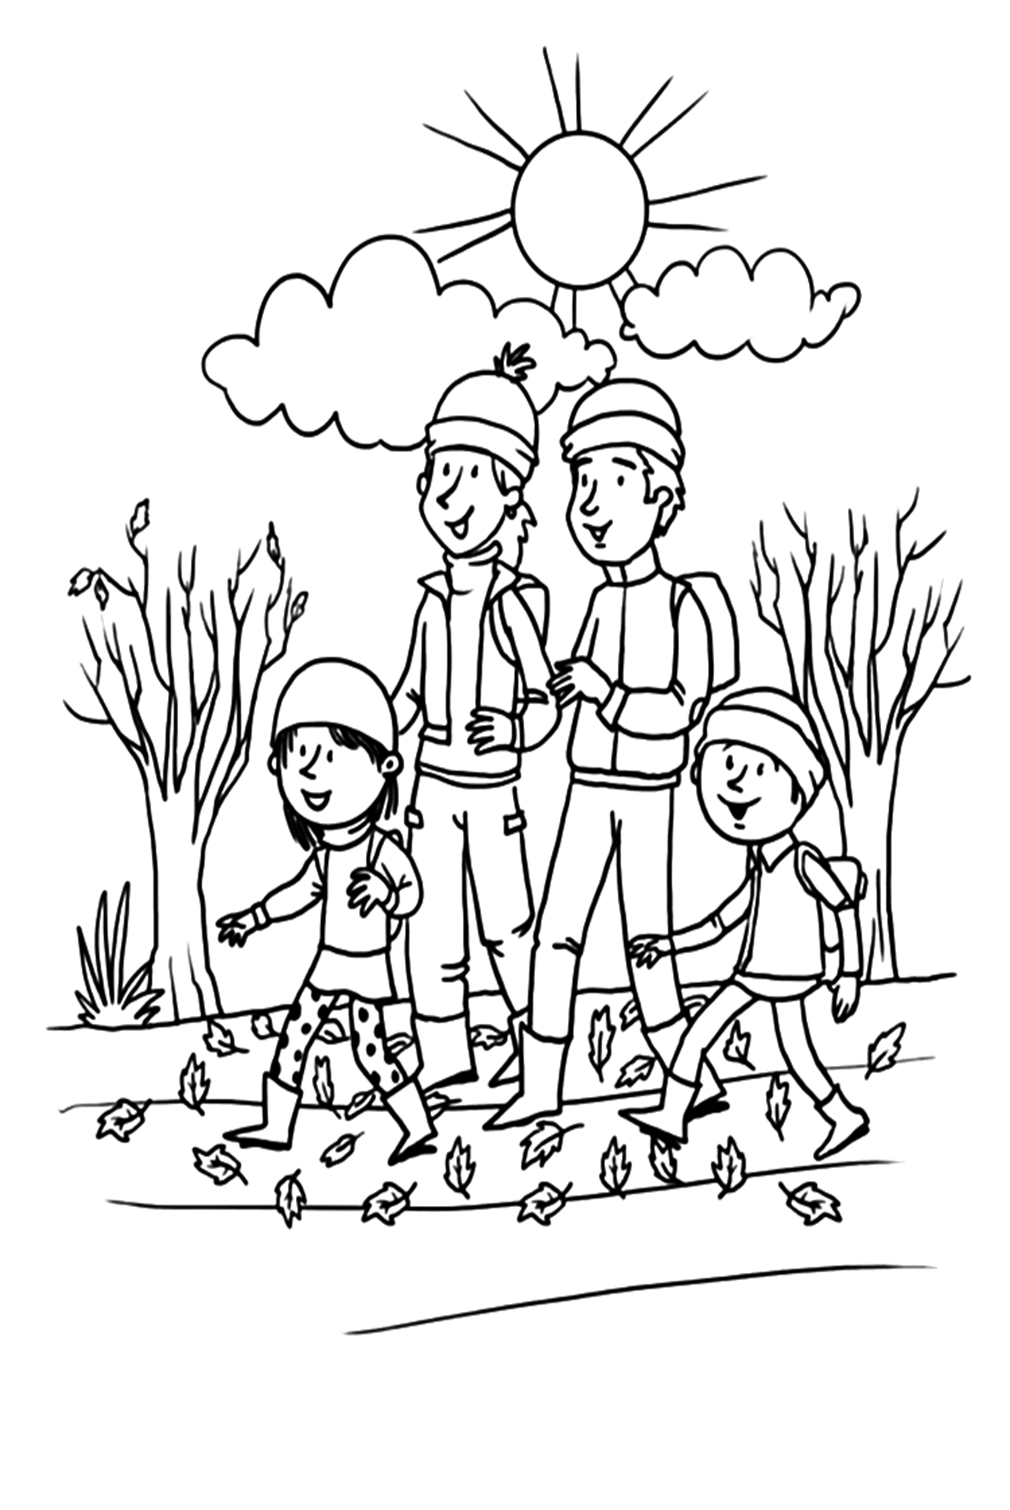 Fall Time Fun Of The Children Coloring Pages